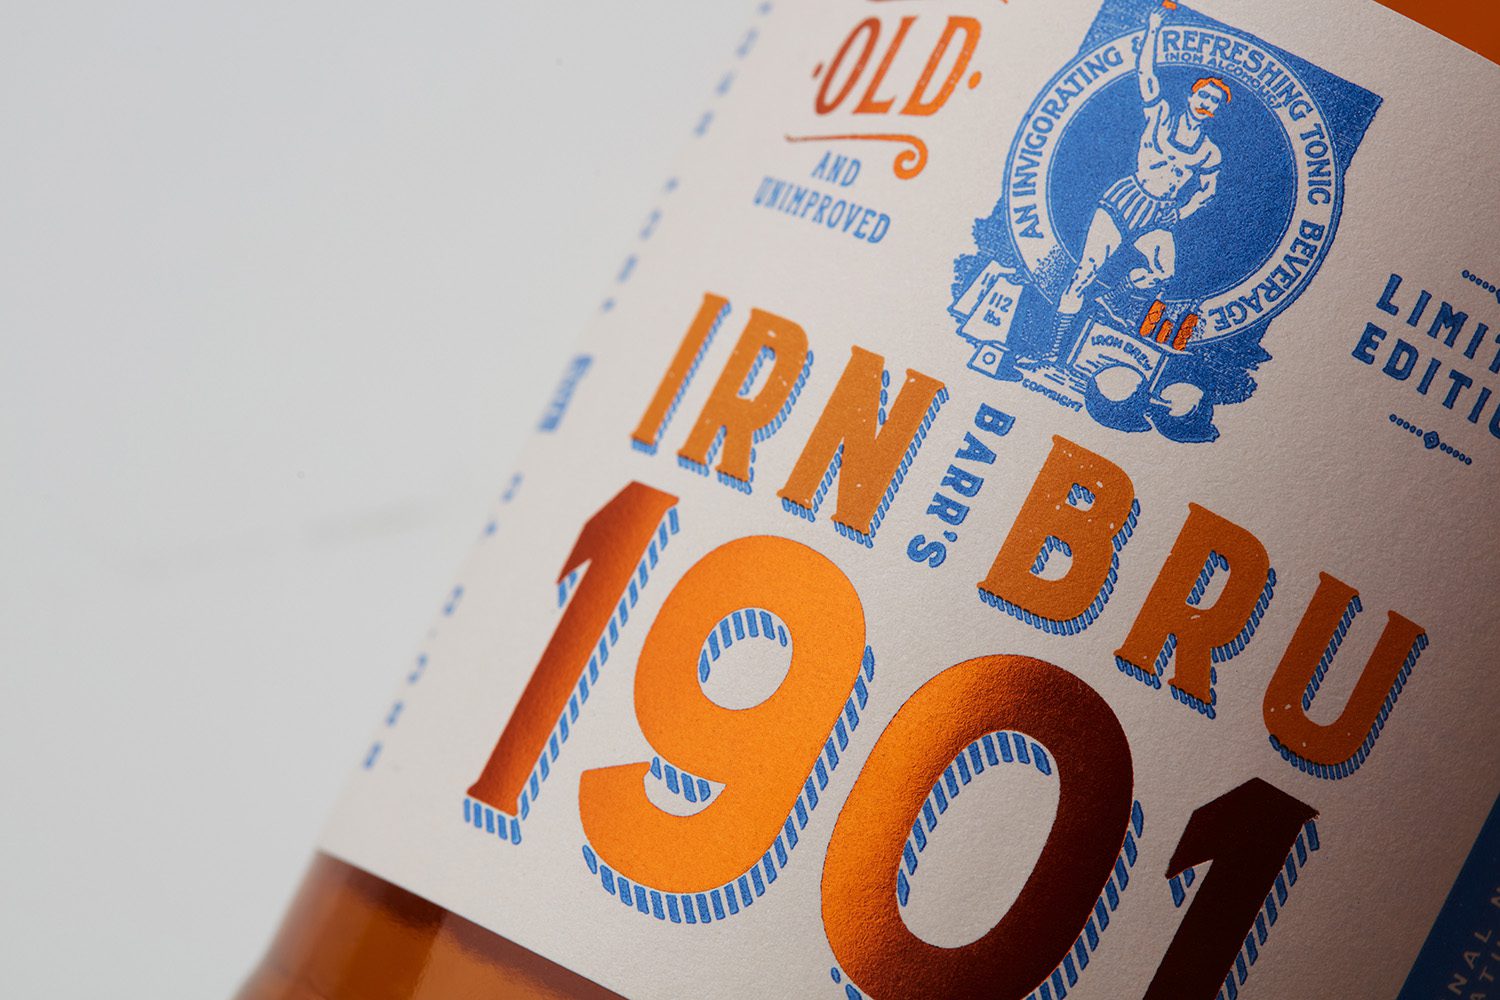 Irn Bru 1901 Full Sugar No Sweetners Christmas Limited Edition CRATE.